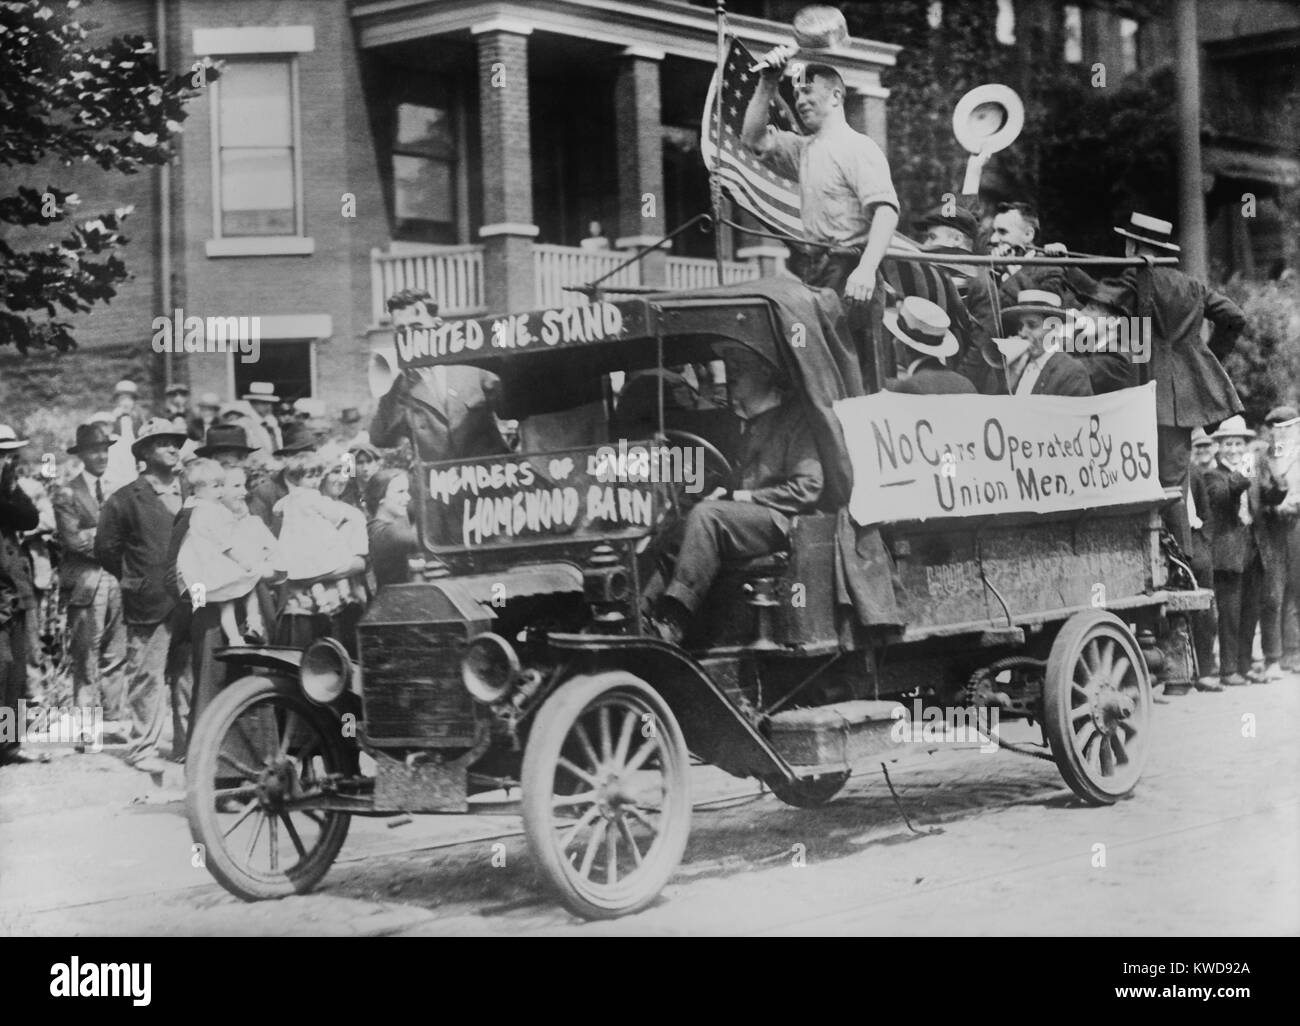 Pittsburgh Streetcar Strike, August 26, 1919. Conductors and motormen from the 'Homewood Barn' parade in trucks with an American flag. Non-lethal violence followed on this day, when the company attempted to run streetcars with strike breakers (BSLOC 2016 8 40) Stock Photo